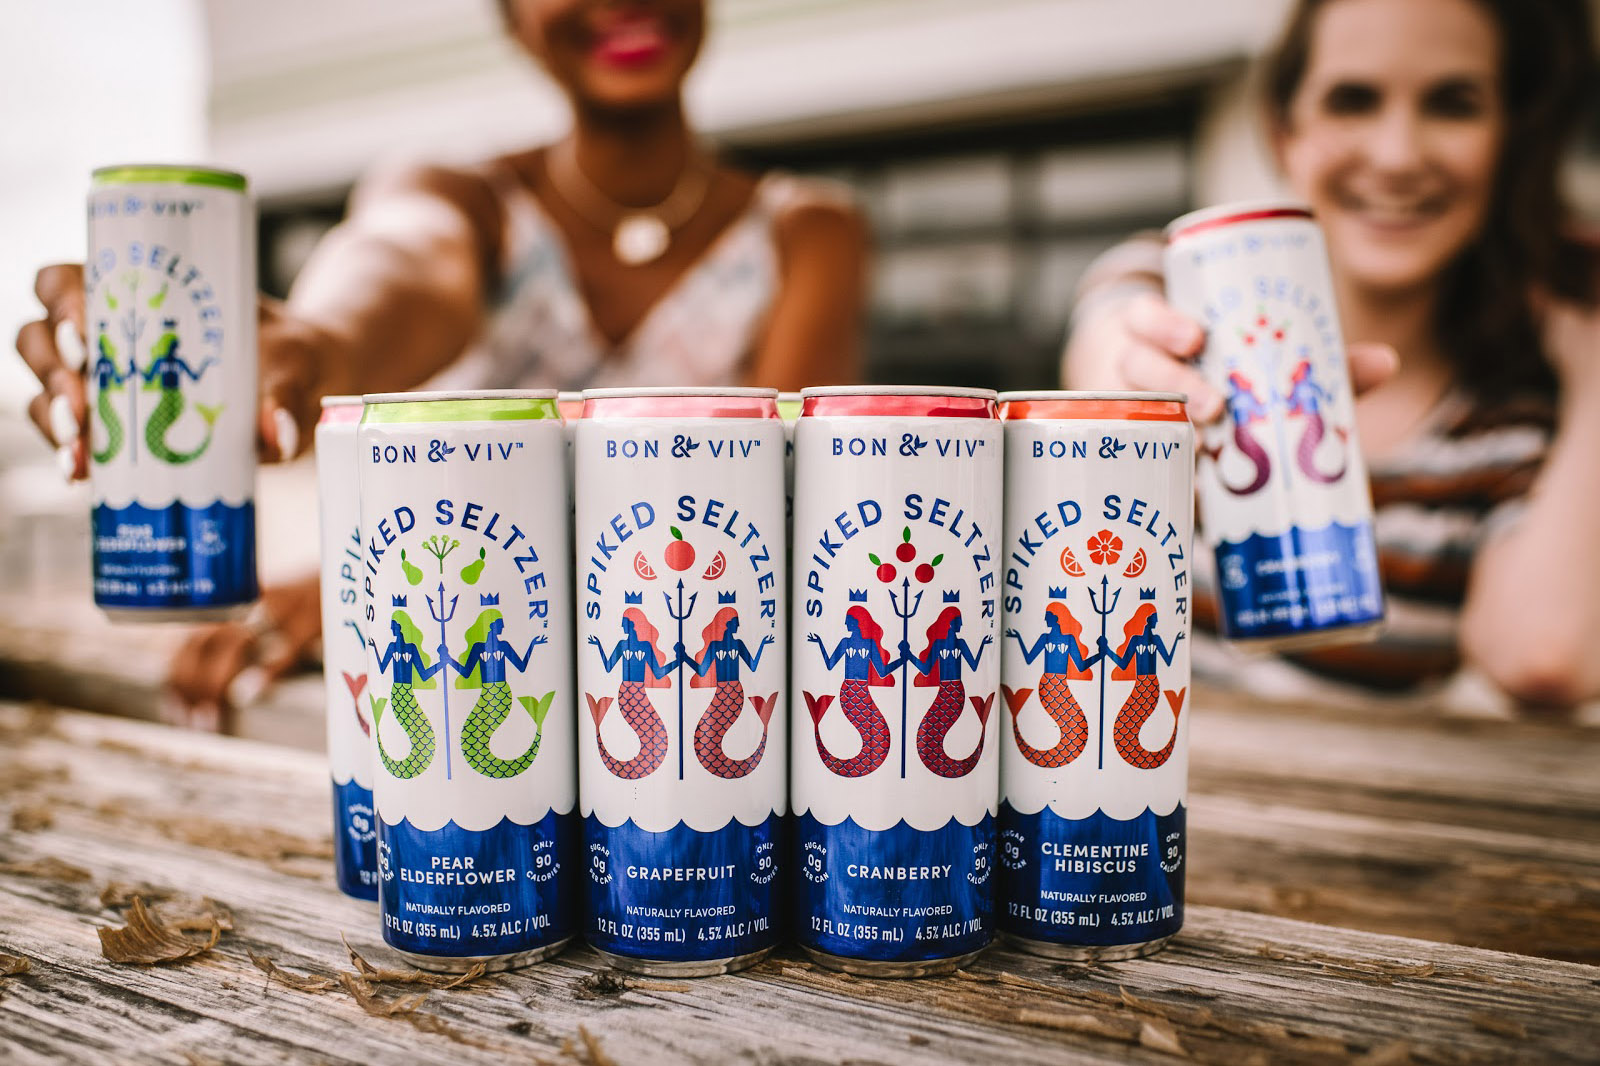 Hard seltzer is here to stay! - Thái Tân